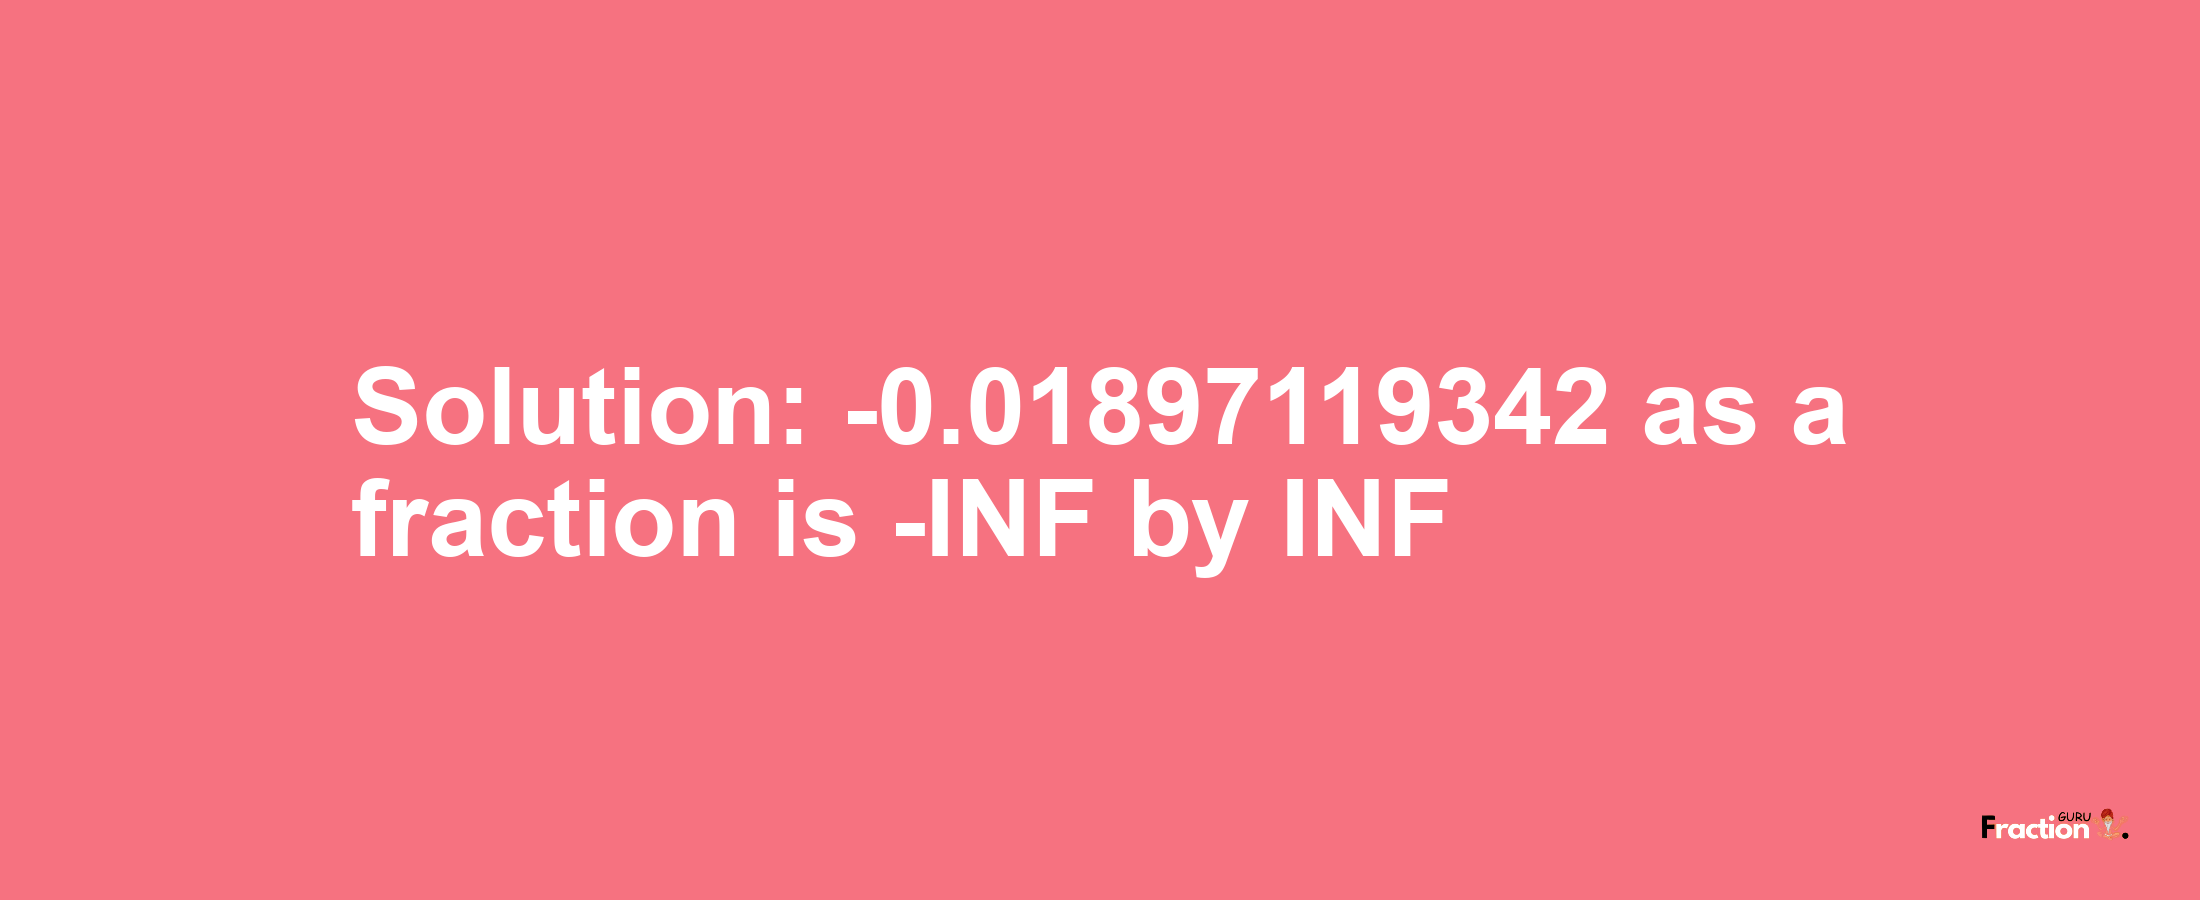 Solution:-0.01897119342 as a fraction is -INF/INF